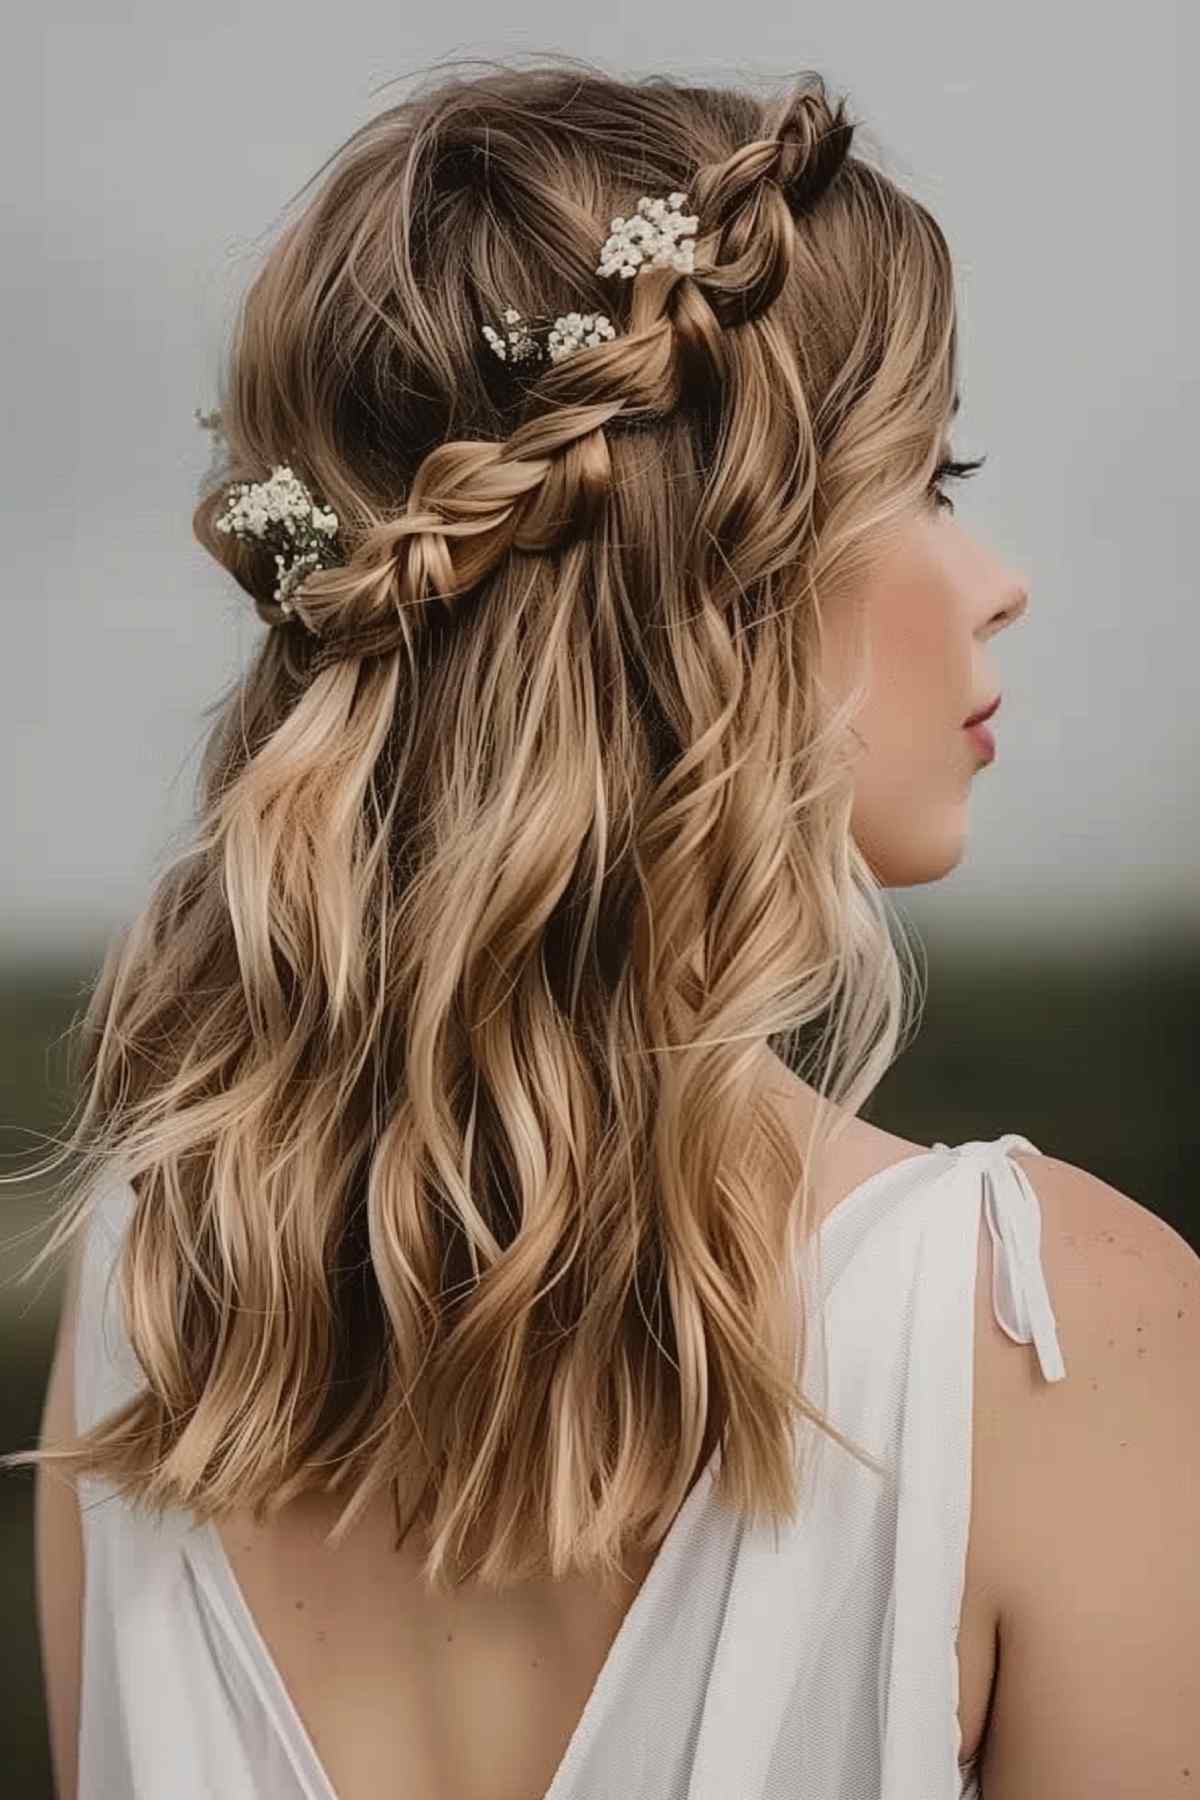 Bohemian wedding hairstyle with braids and waves decorated with white floral accents in blonde hair